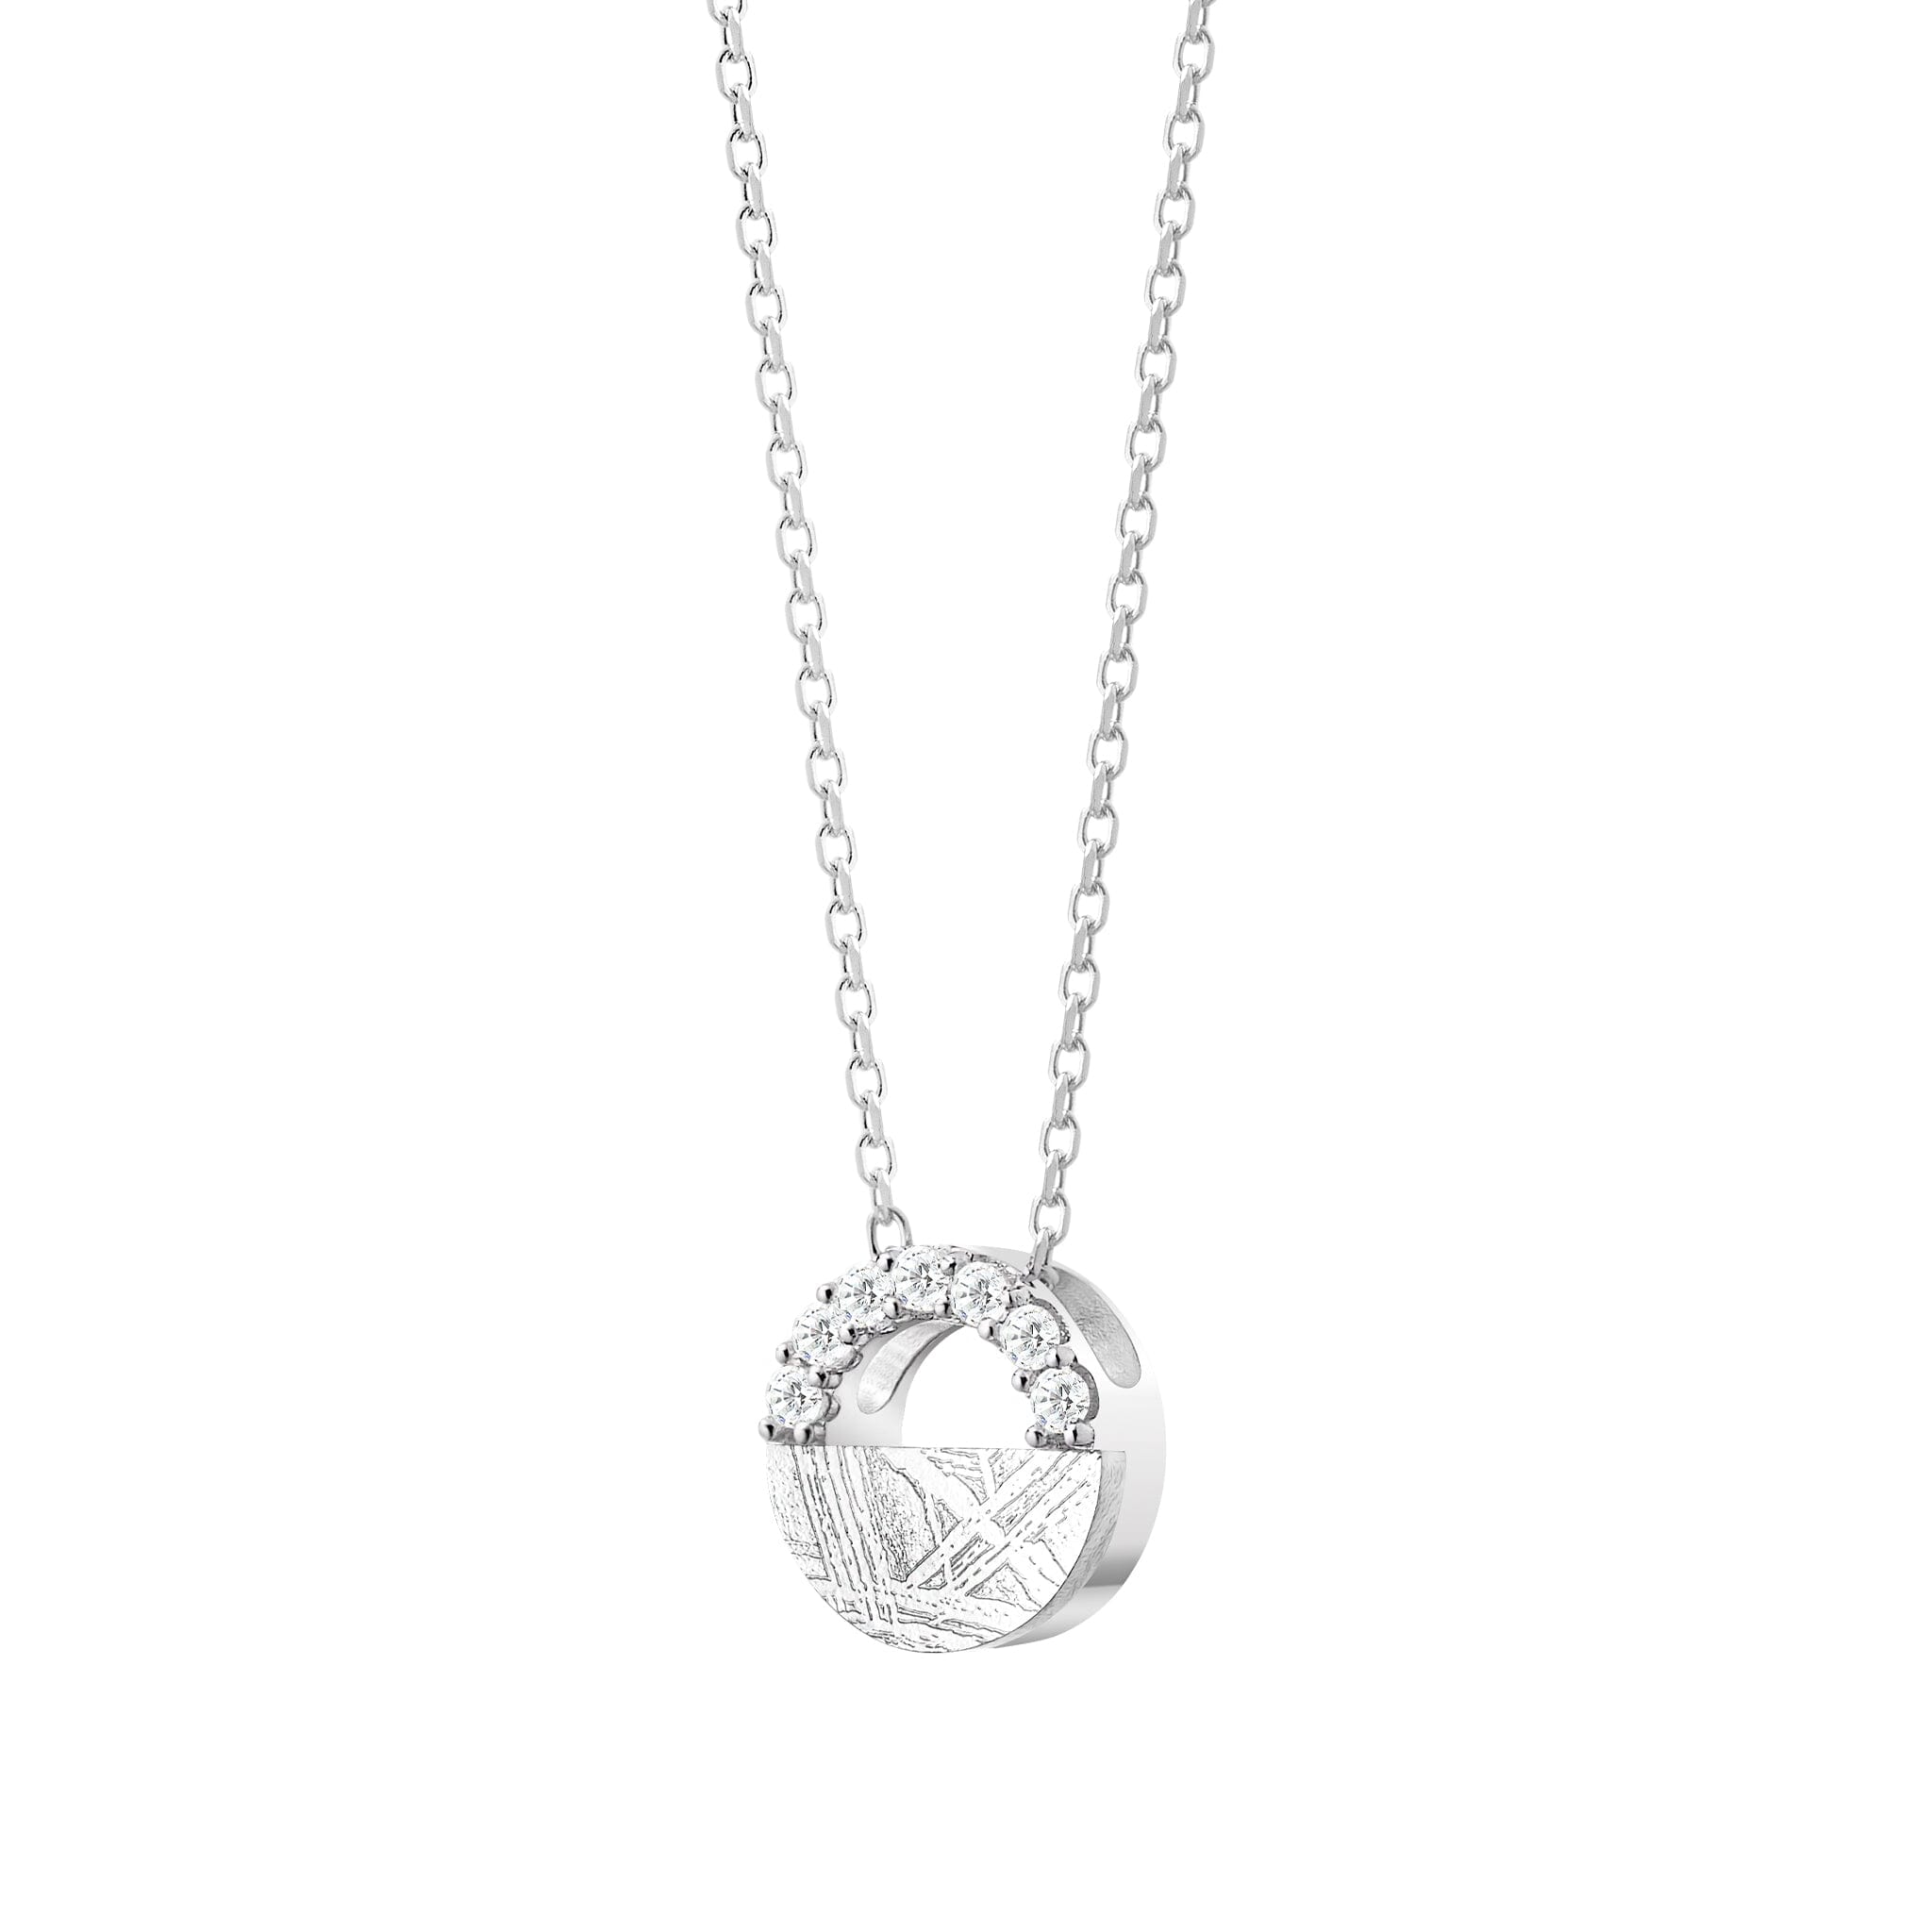 Women's Starry Night Necklace with Meteorite Necklaces WAA FASHION GROUP Silver Adjustable 